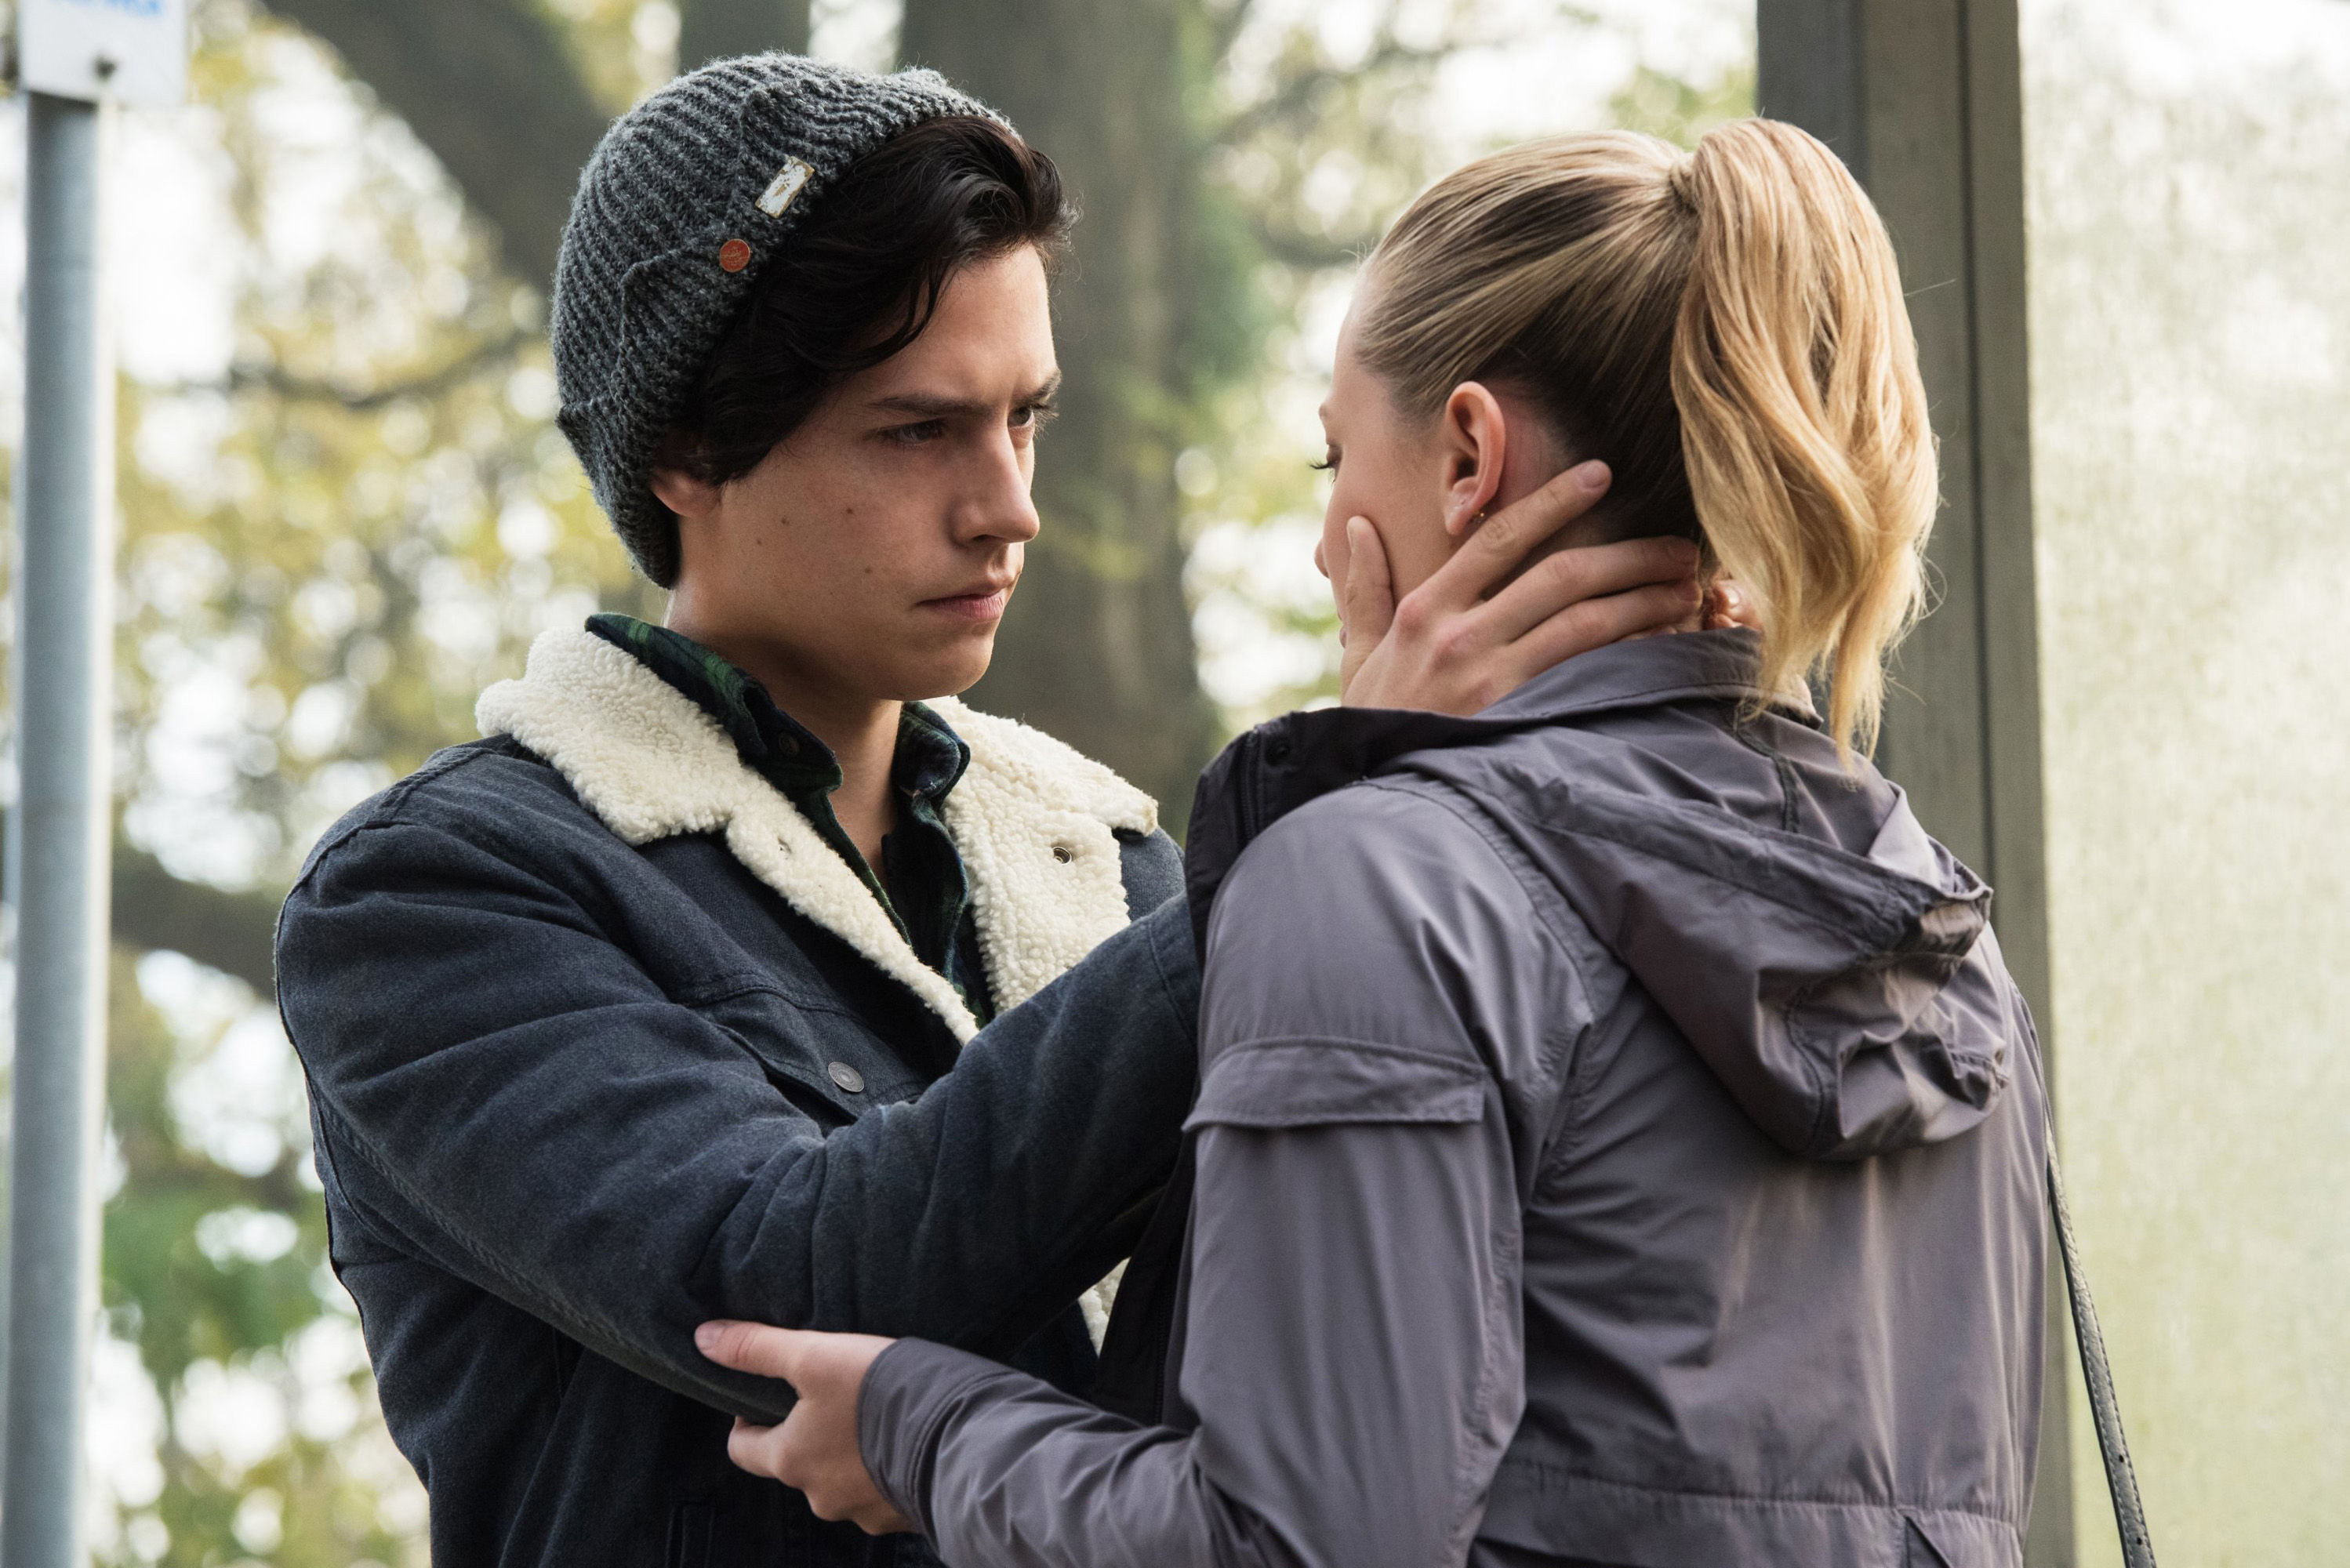 Jughead looks at Betty while holding her face in his hands